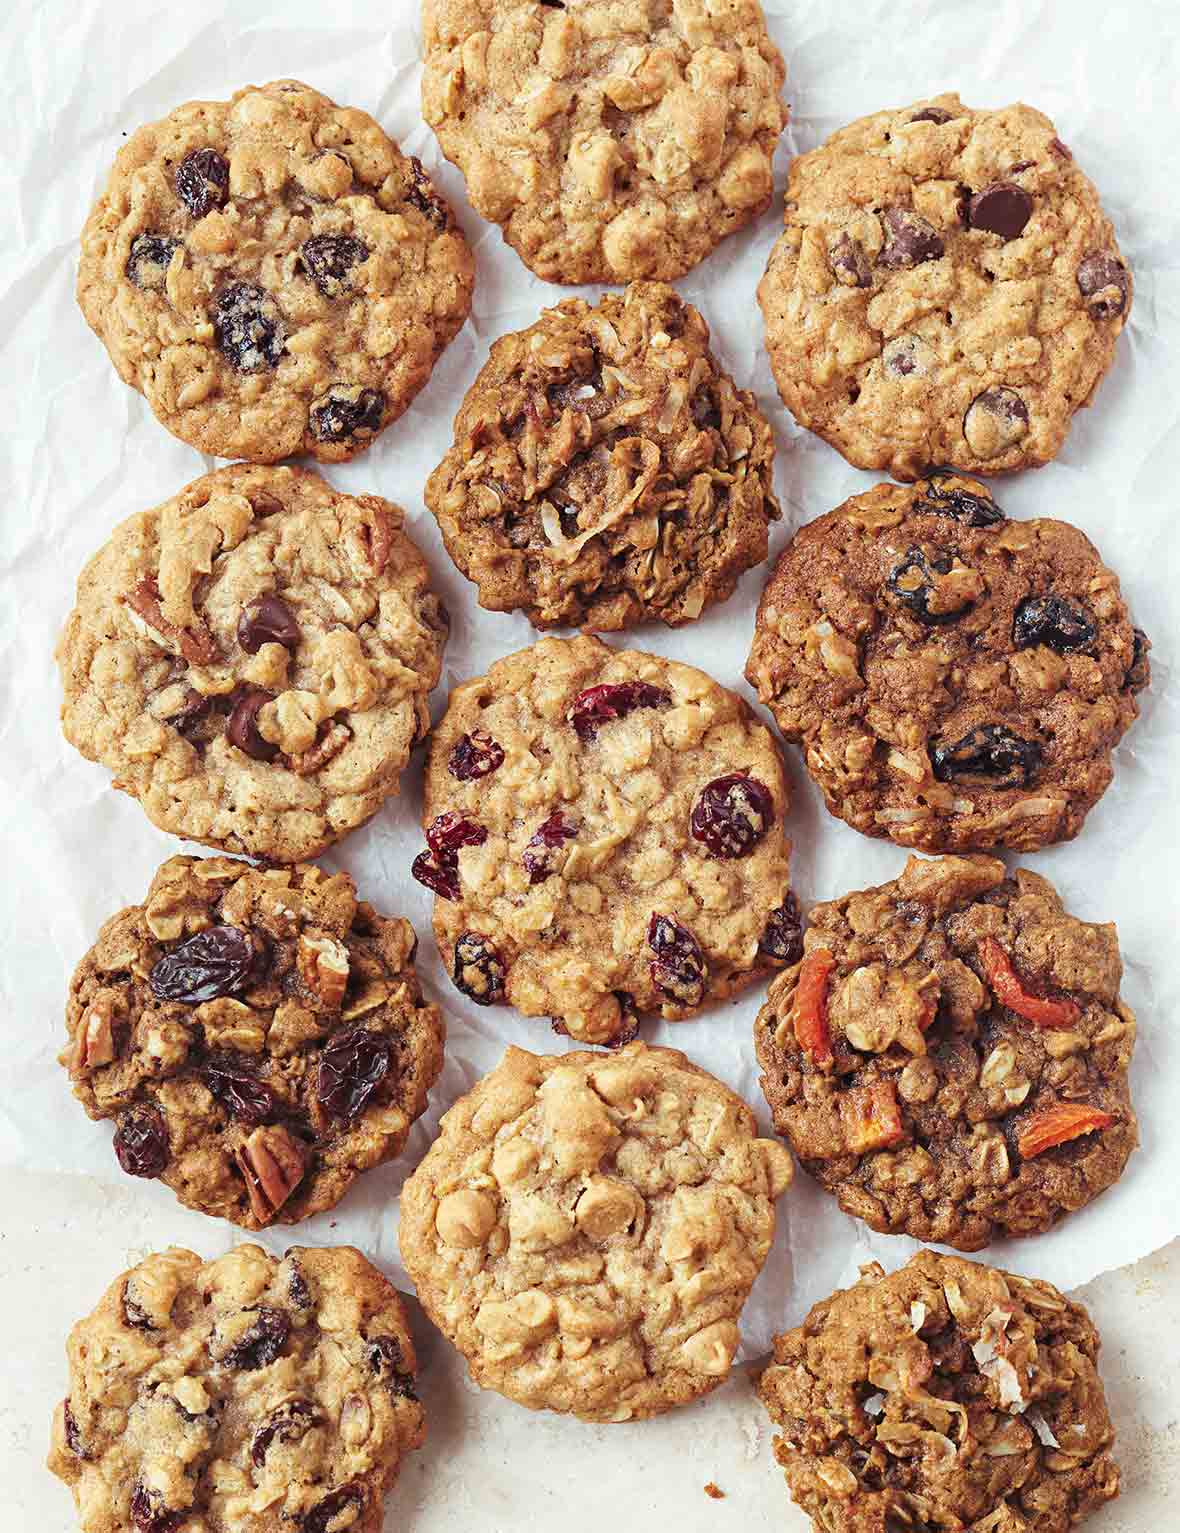 Recipes For Oatmeal Cookies
 Best Oatmeal Cookies Recipe